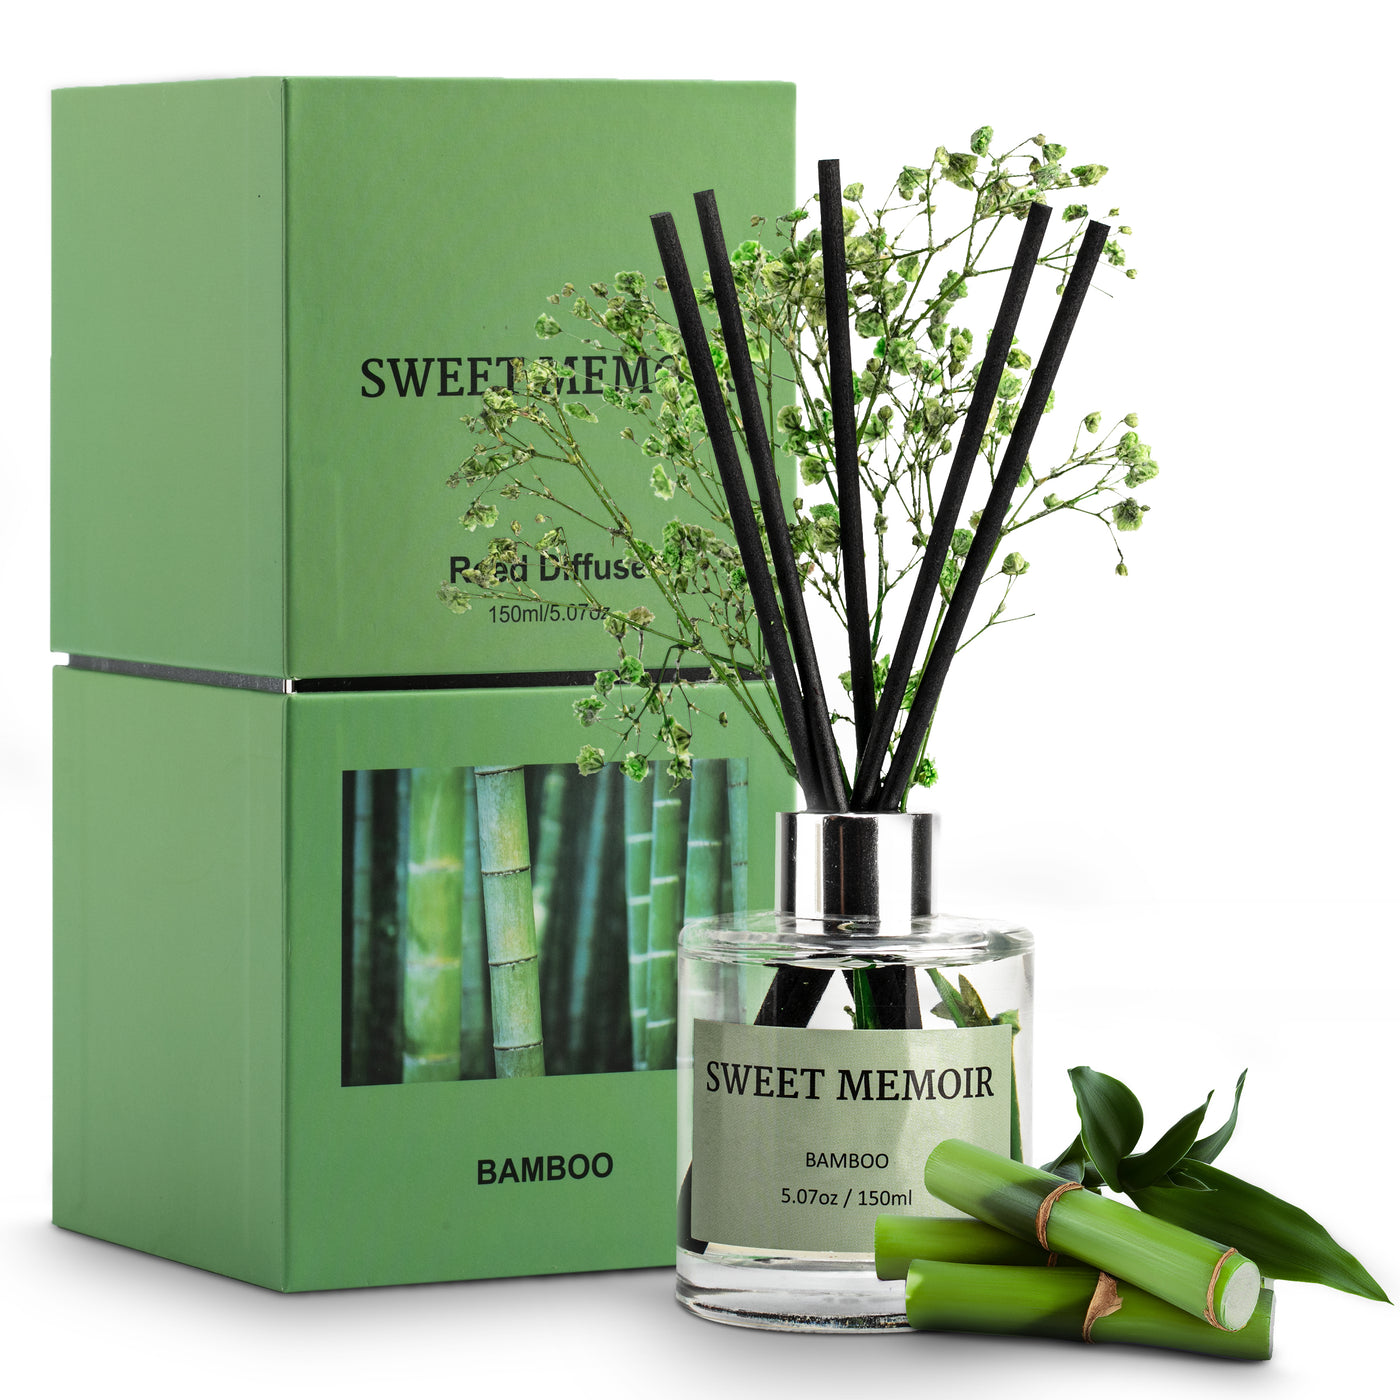 Sweet Memoir Bamboo Zen Reed Diffuser 150ml in clear glass bottle with green bamboo sticks, accompanied by a decorative green box.